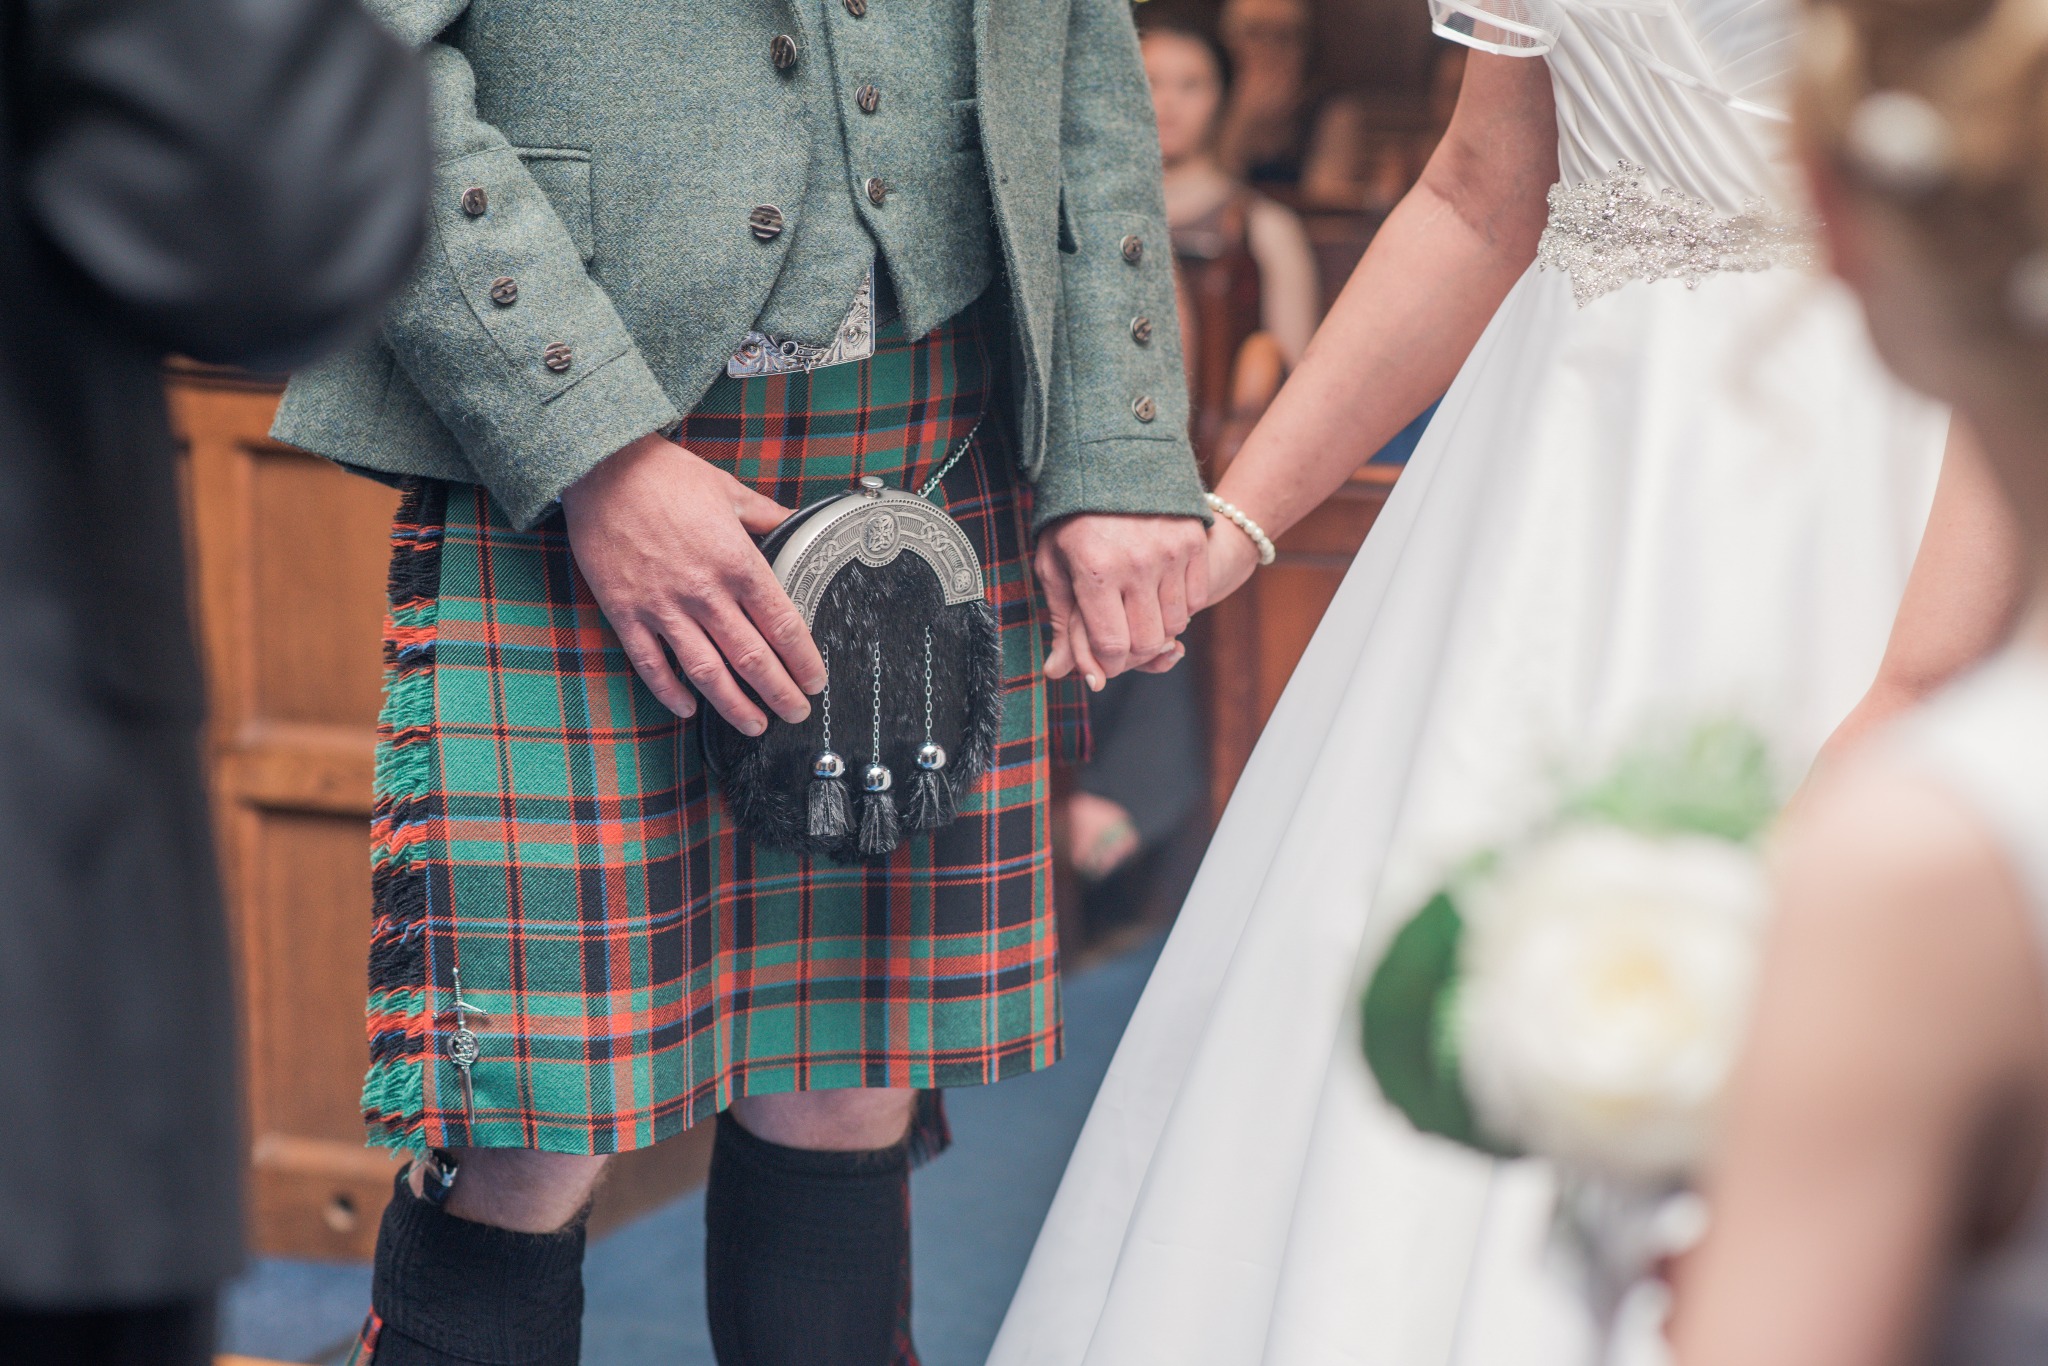 A Scottish Wedding without a handfasting ribbon